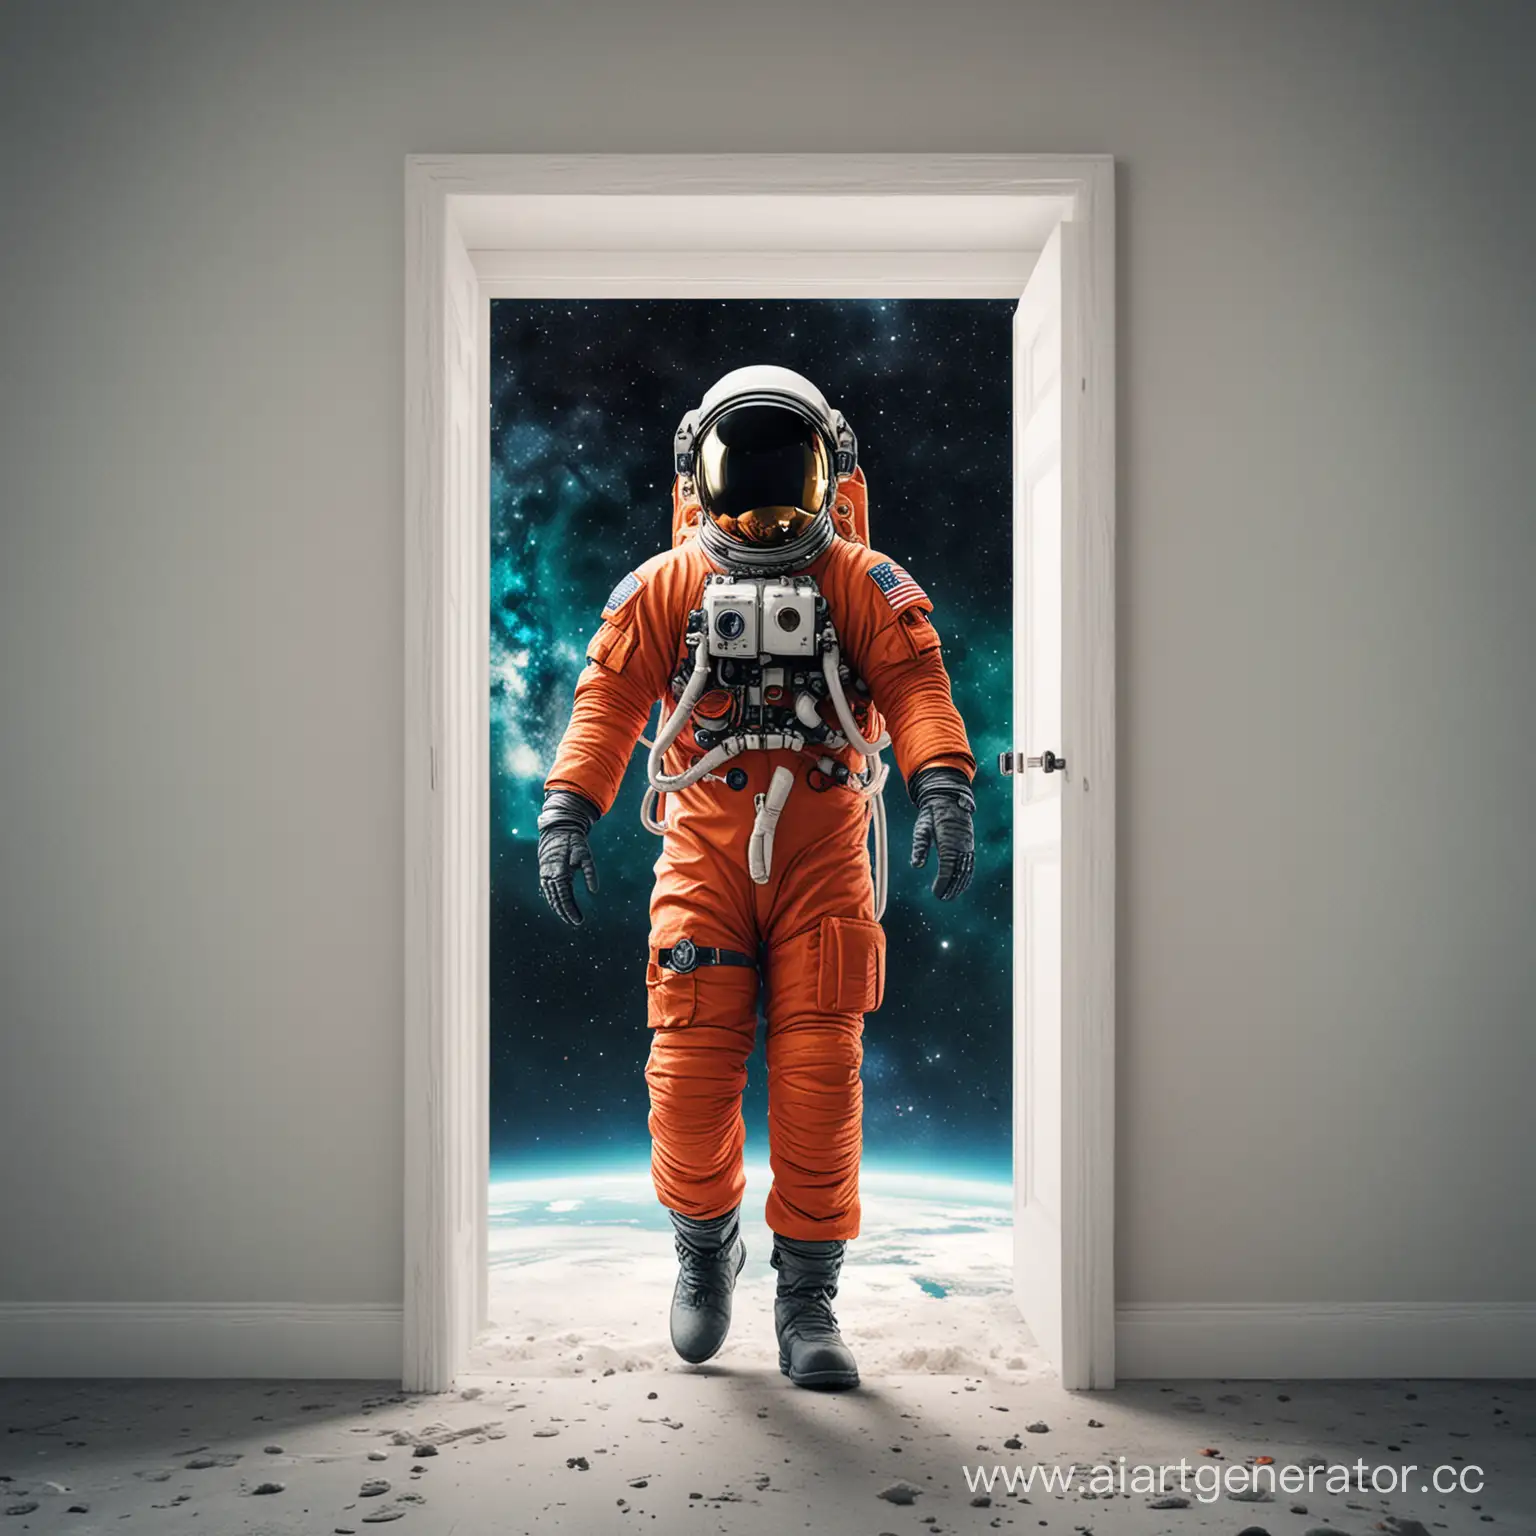 Exploring-Astronaut-Emerges-from-Alternate-Reality-with-Vivid-Colors